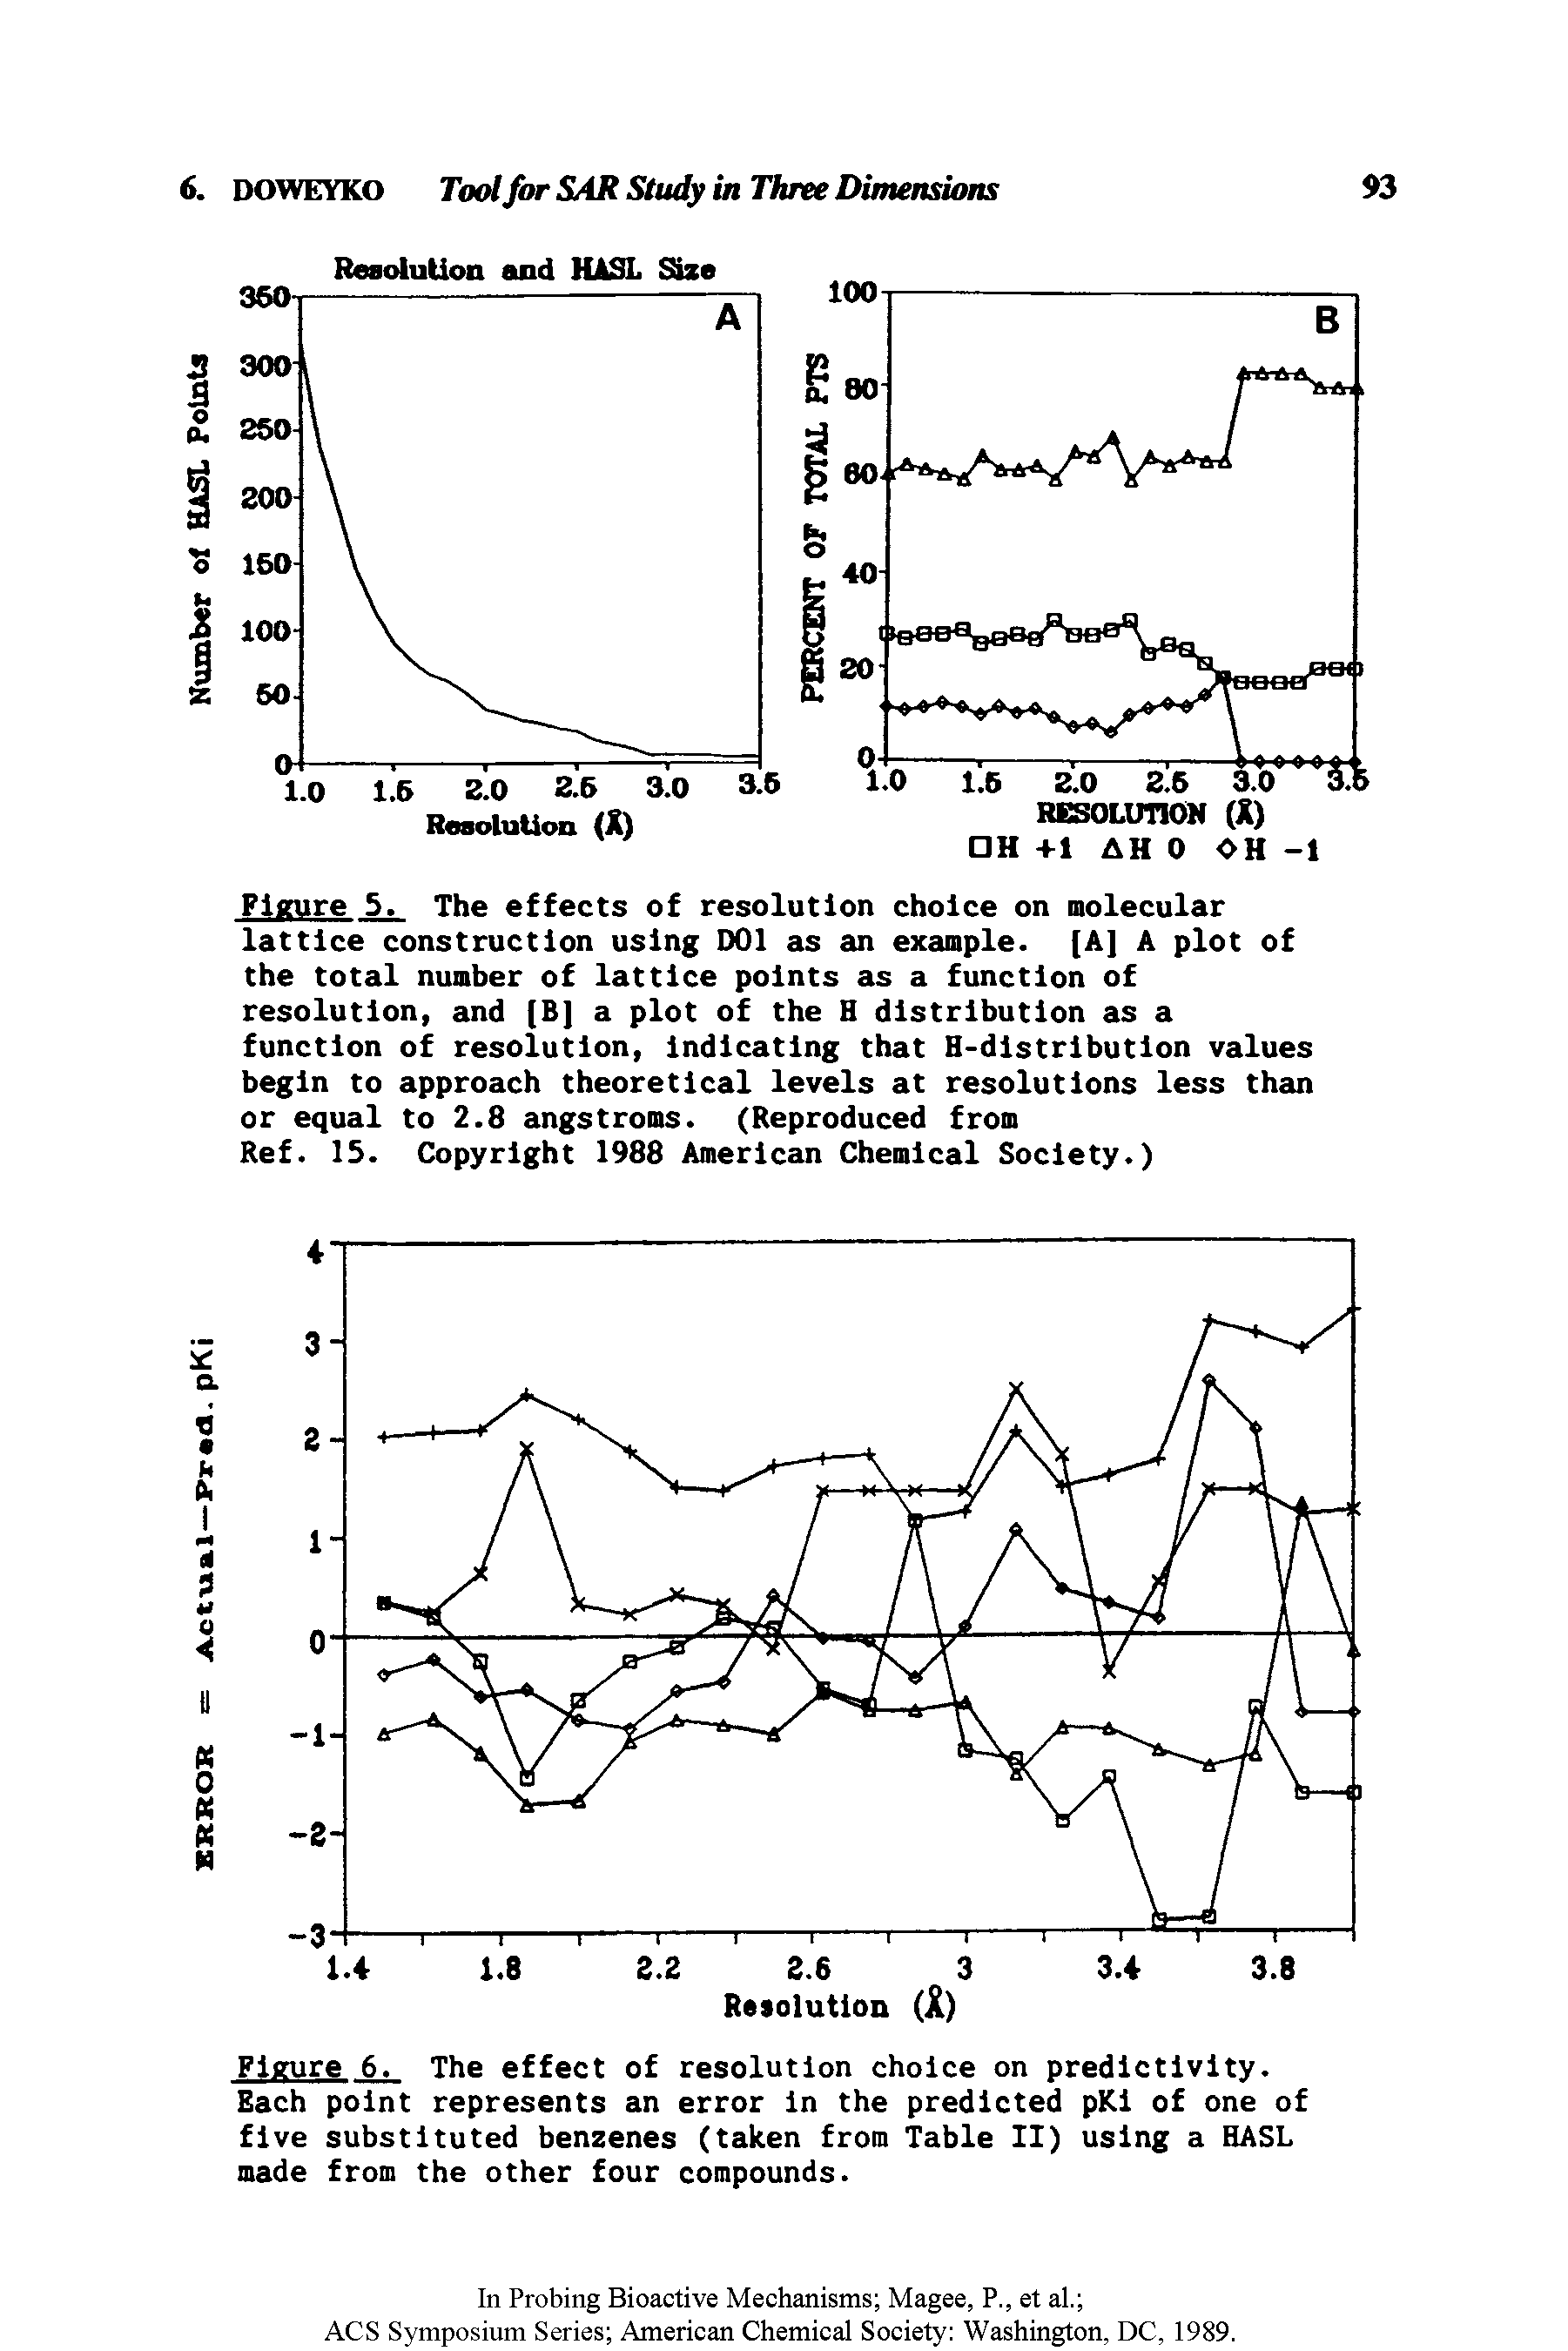 Figure 5. The effects of resolution choice on molecular lattice construction using DOl as an example. [A] A plot of the total number of lattice points as a function of resolution, and (B] a plot of the H distribution as a function of resolution, indicating that H-distribution values begin to approach theoretical levels at resolutions less than or equal to 2.8 angstroms. (Reproduced from Ref. 15. Copyright 1988 American Chemical Society.)...